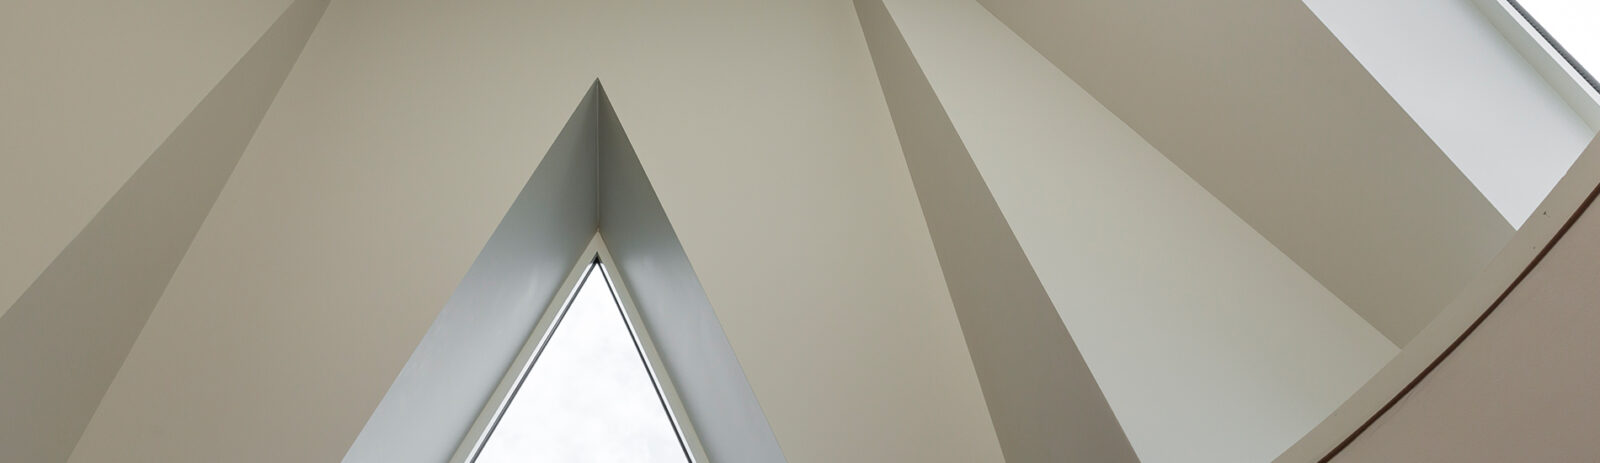 A triangle shaped window surrounded by cream colored walls.